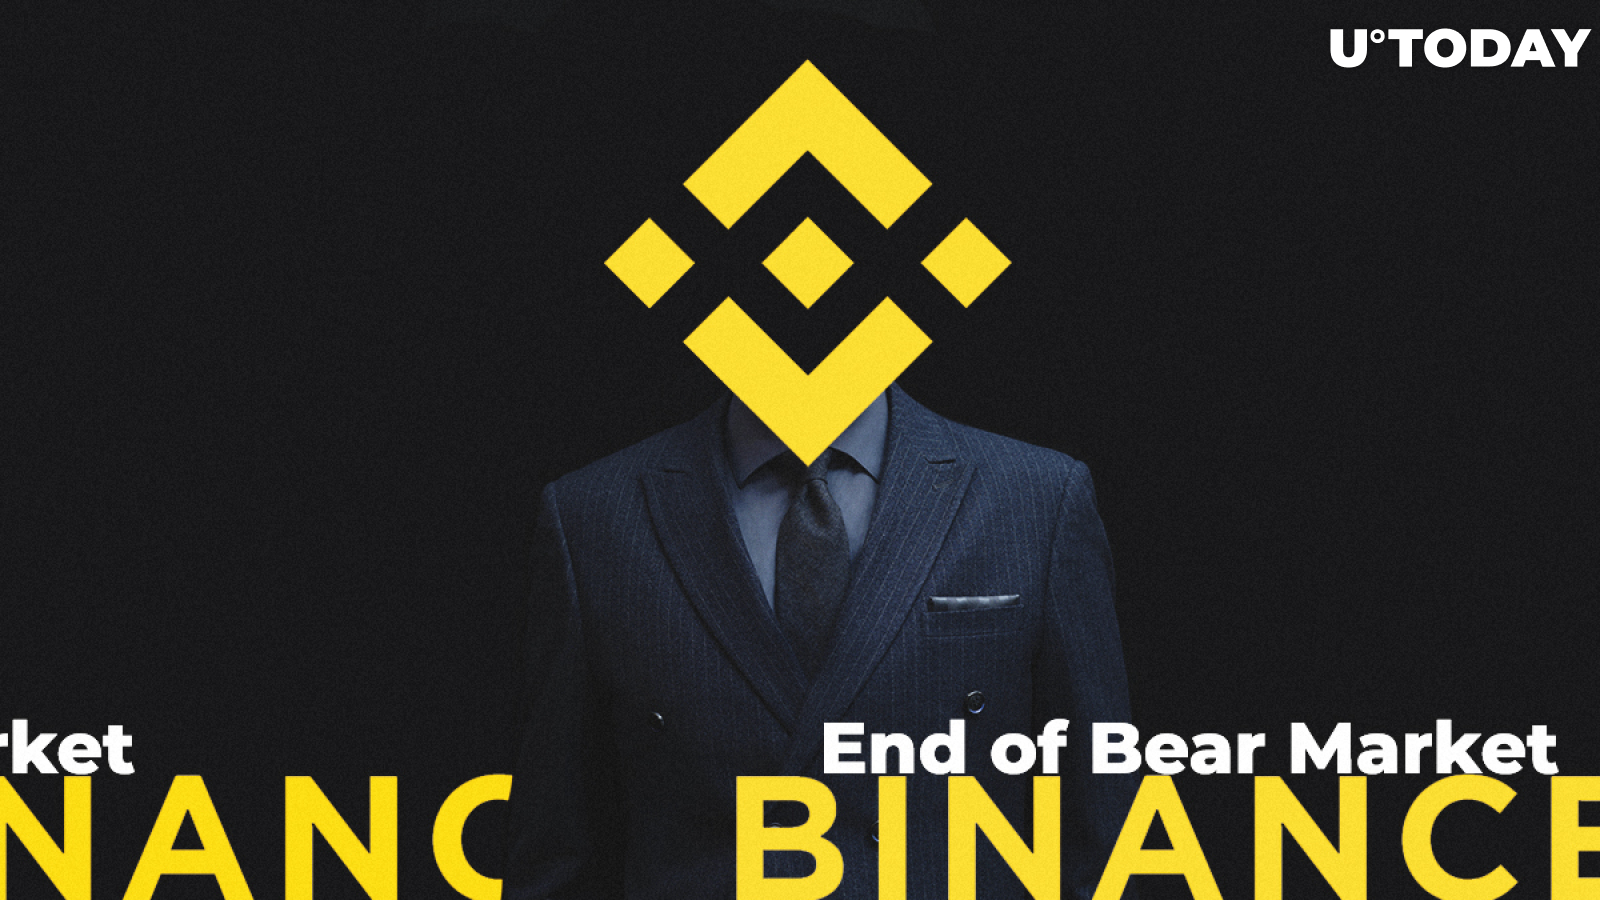 Binance Reports Cryptocurrency Price Trends Are Signalling the End of Bear Market